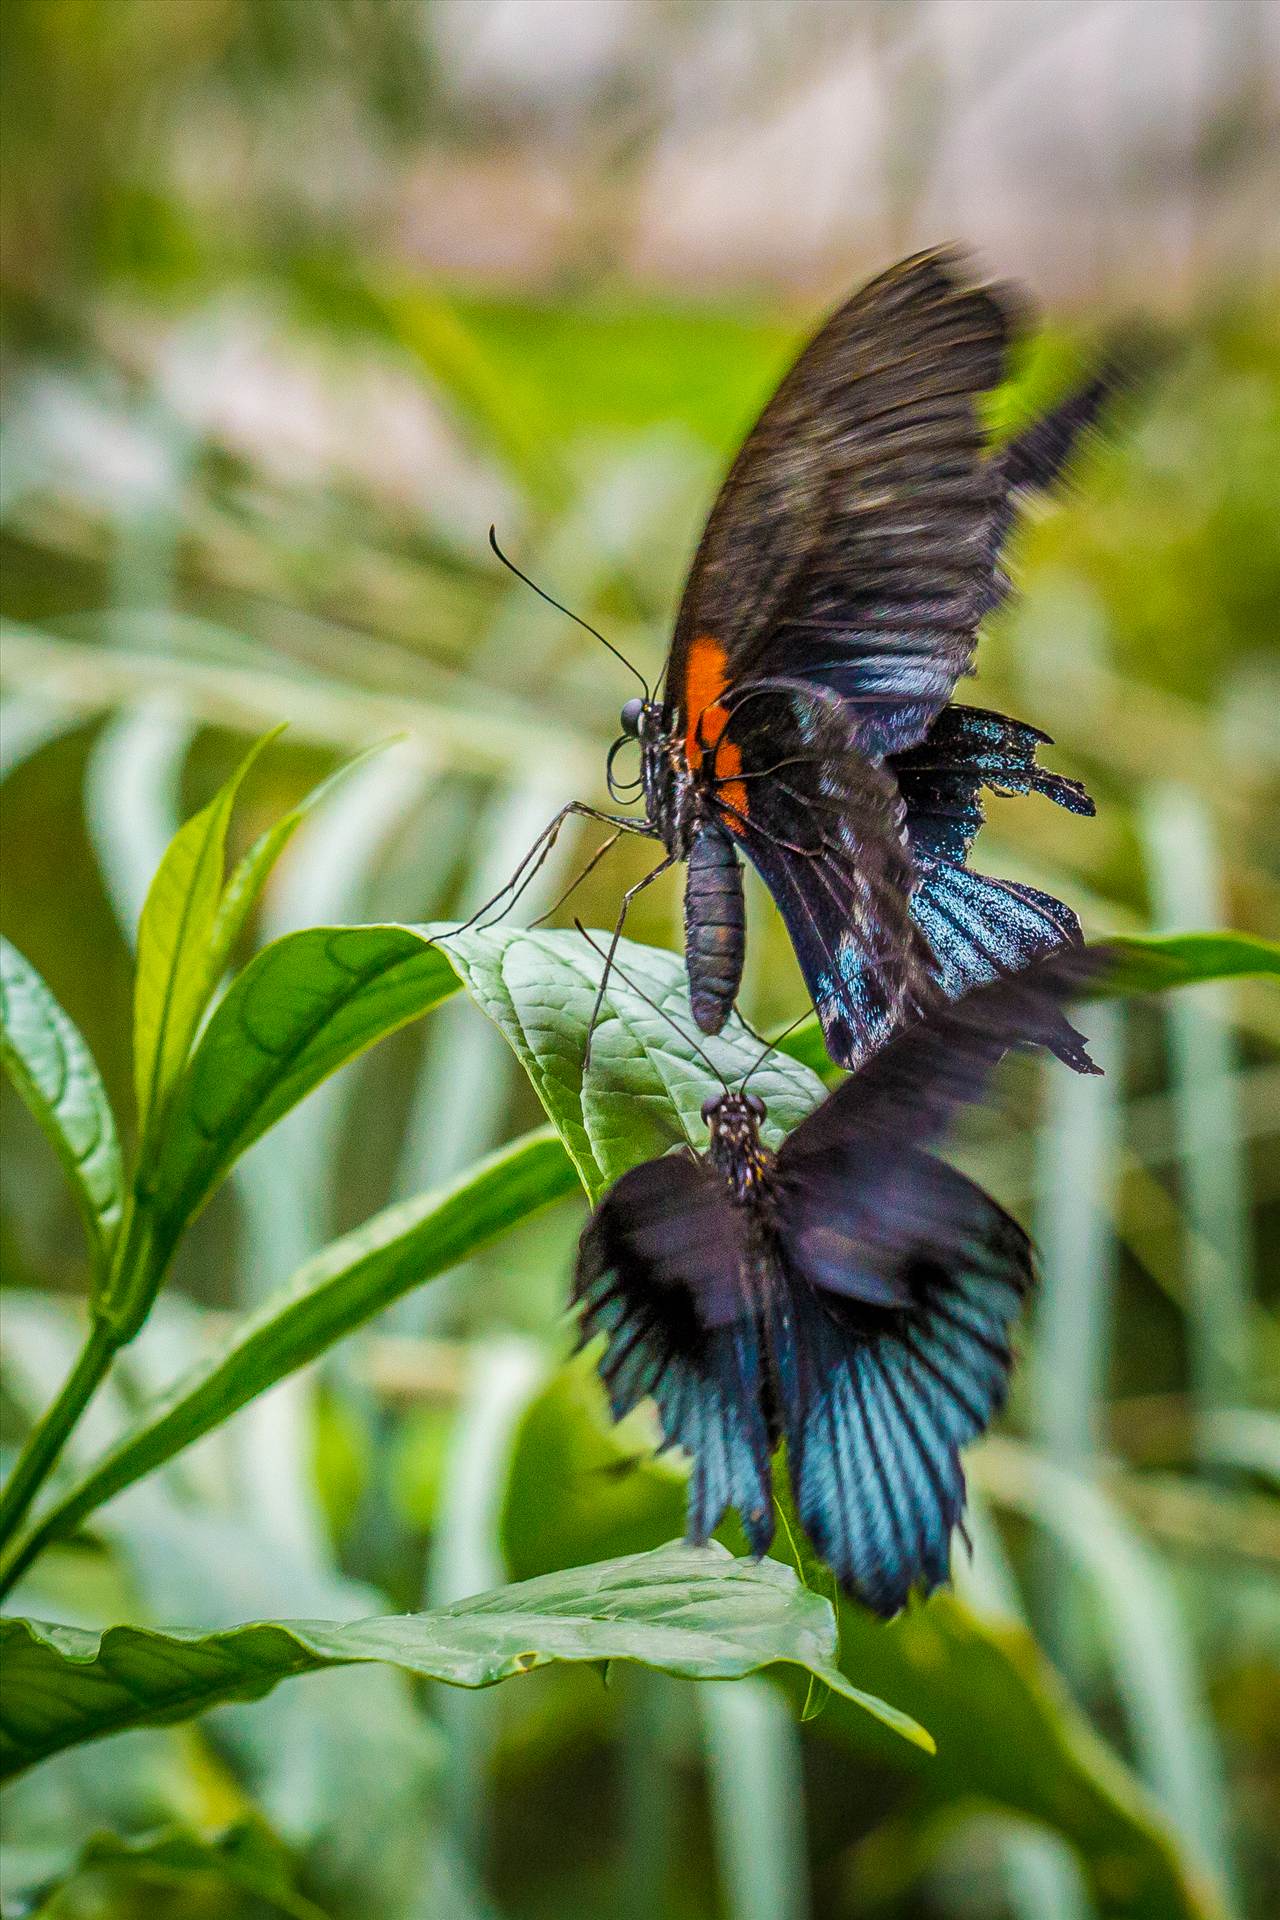 Attack! - It may not be a fight per se, but it appears that two butterflies are having it out in this action shot. by Scott Smith Photos